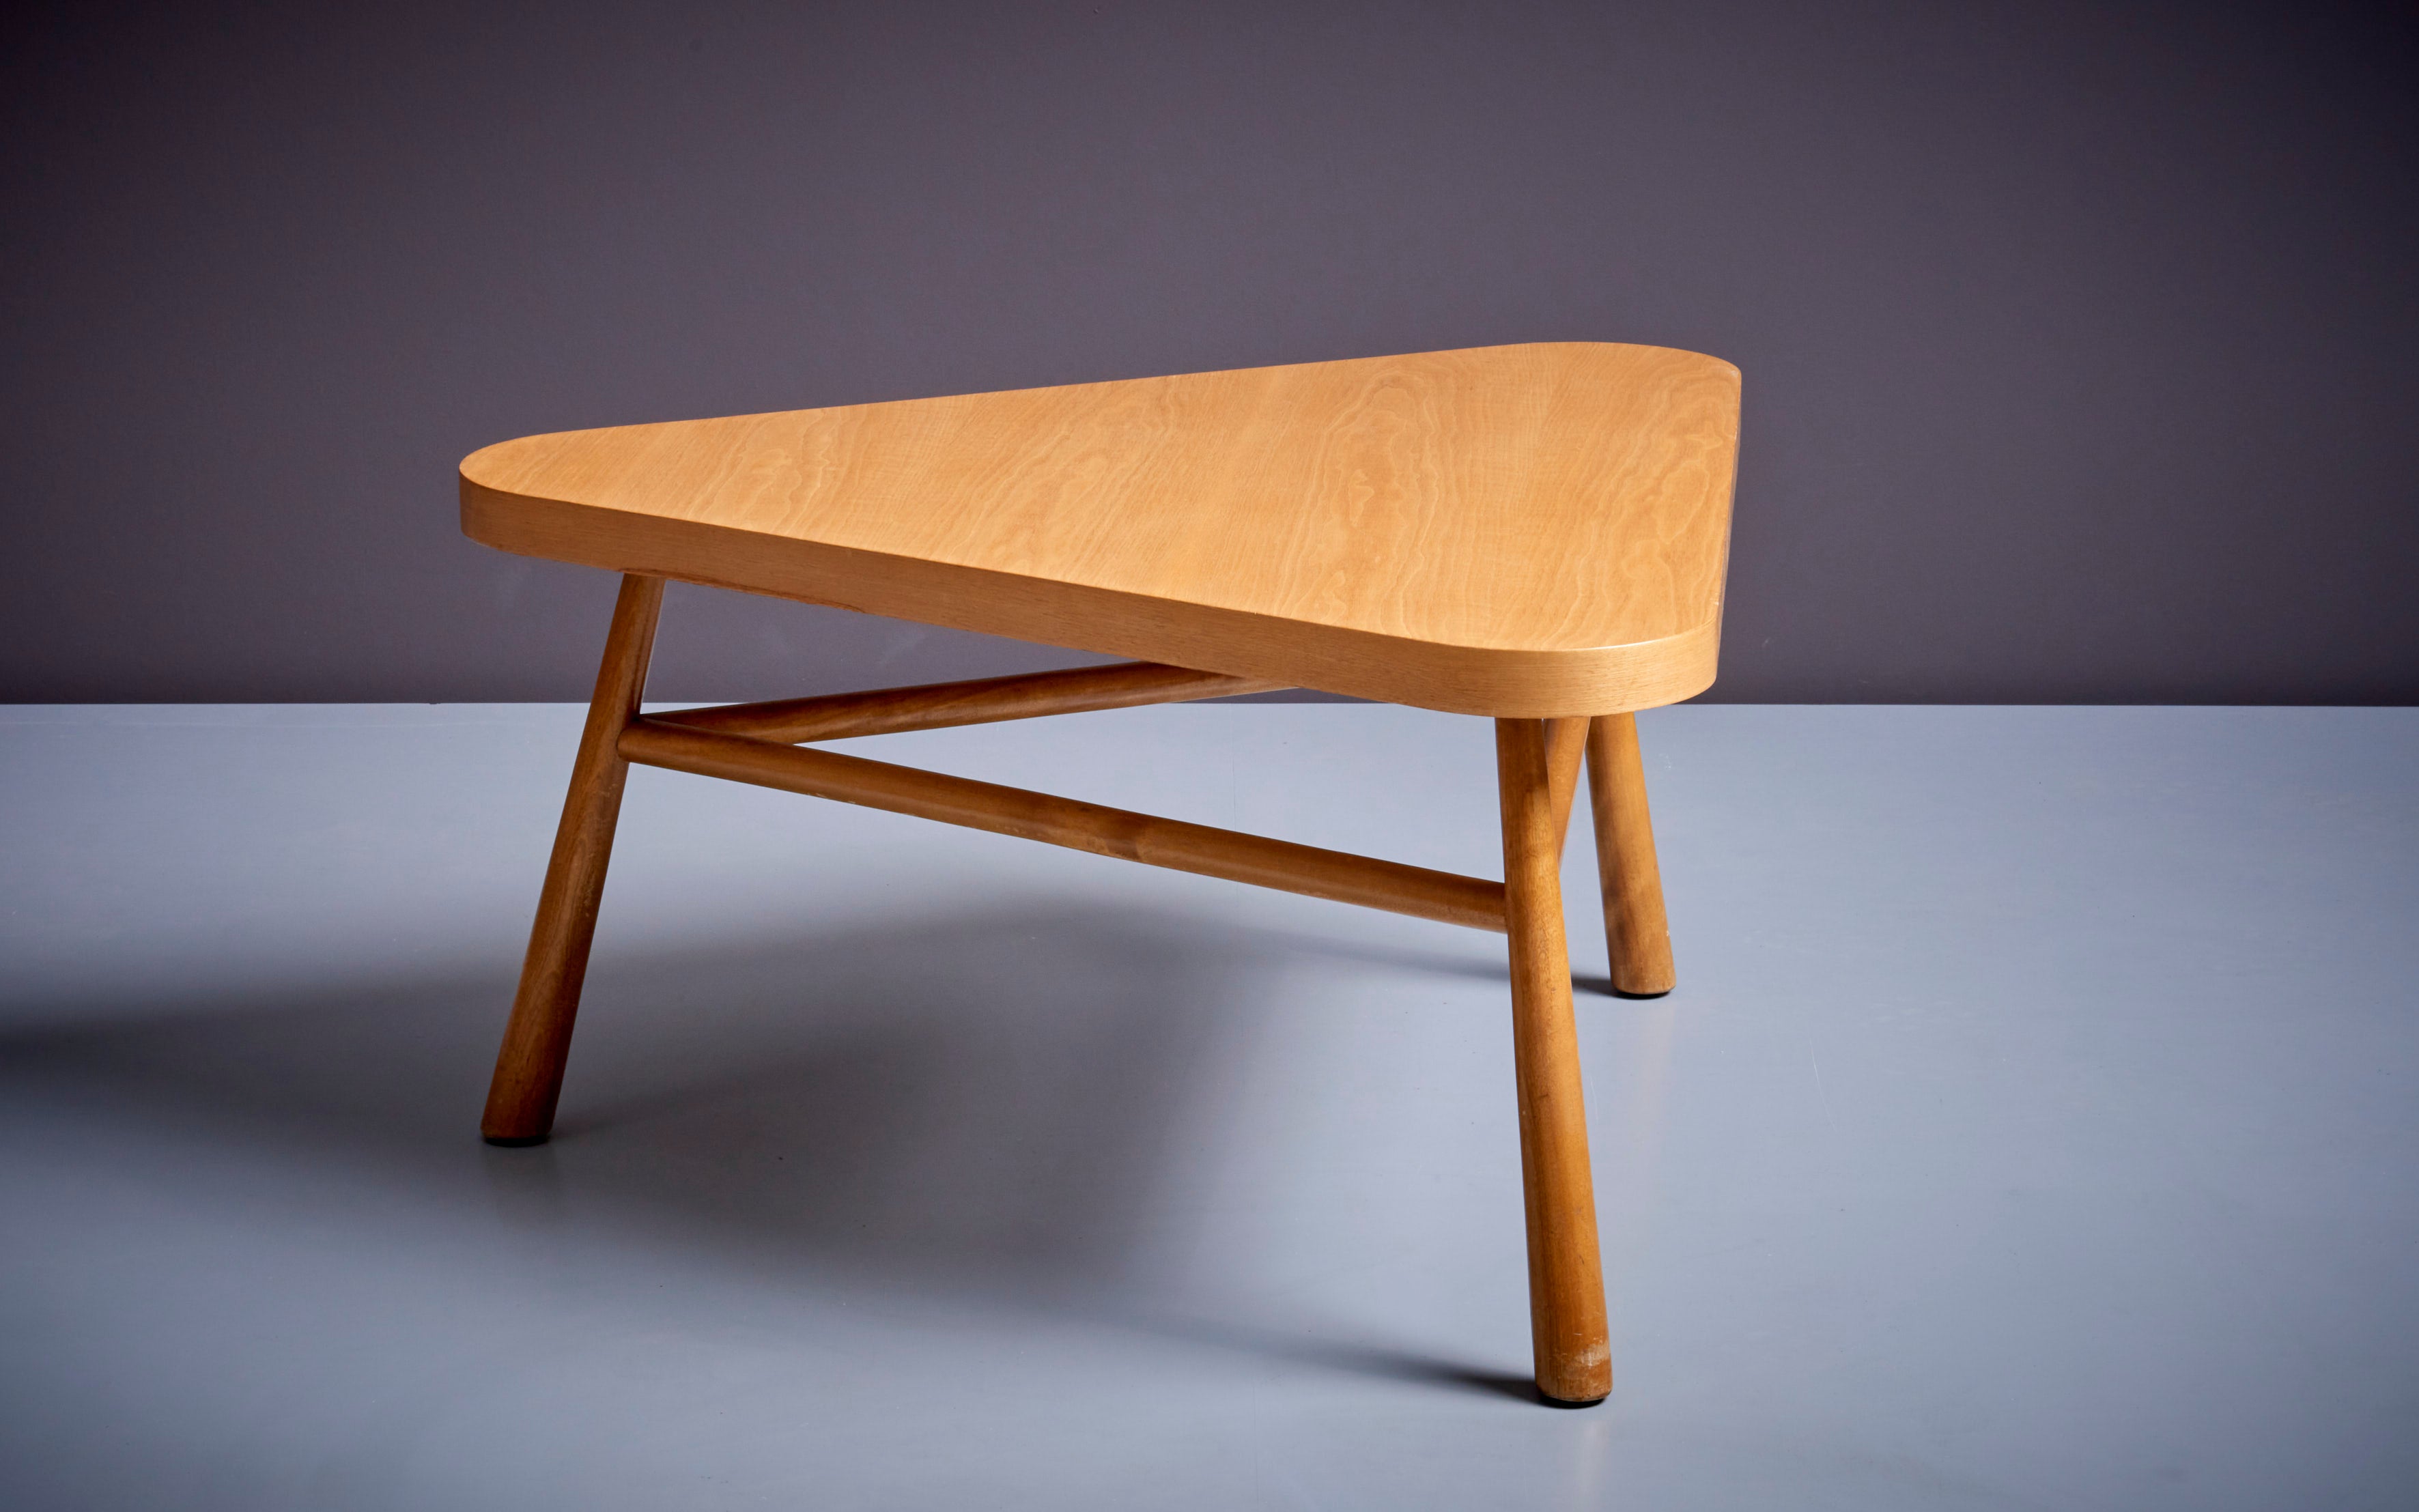 Triangular table by Gibbings for Widdicomb, 1950s, USA in original vintage condition.

T.H. Robsjohn-Gibbings was a furniture designer who became famous for his modernist designs in the mid-20th century. Born in the UK in 1905, he moved to New York